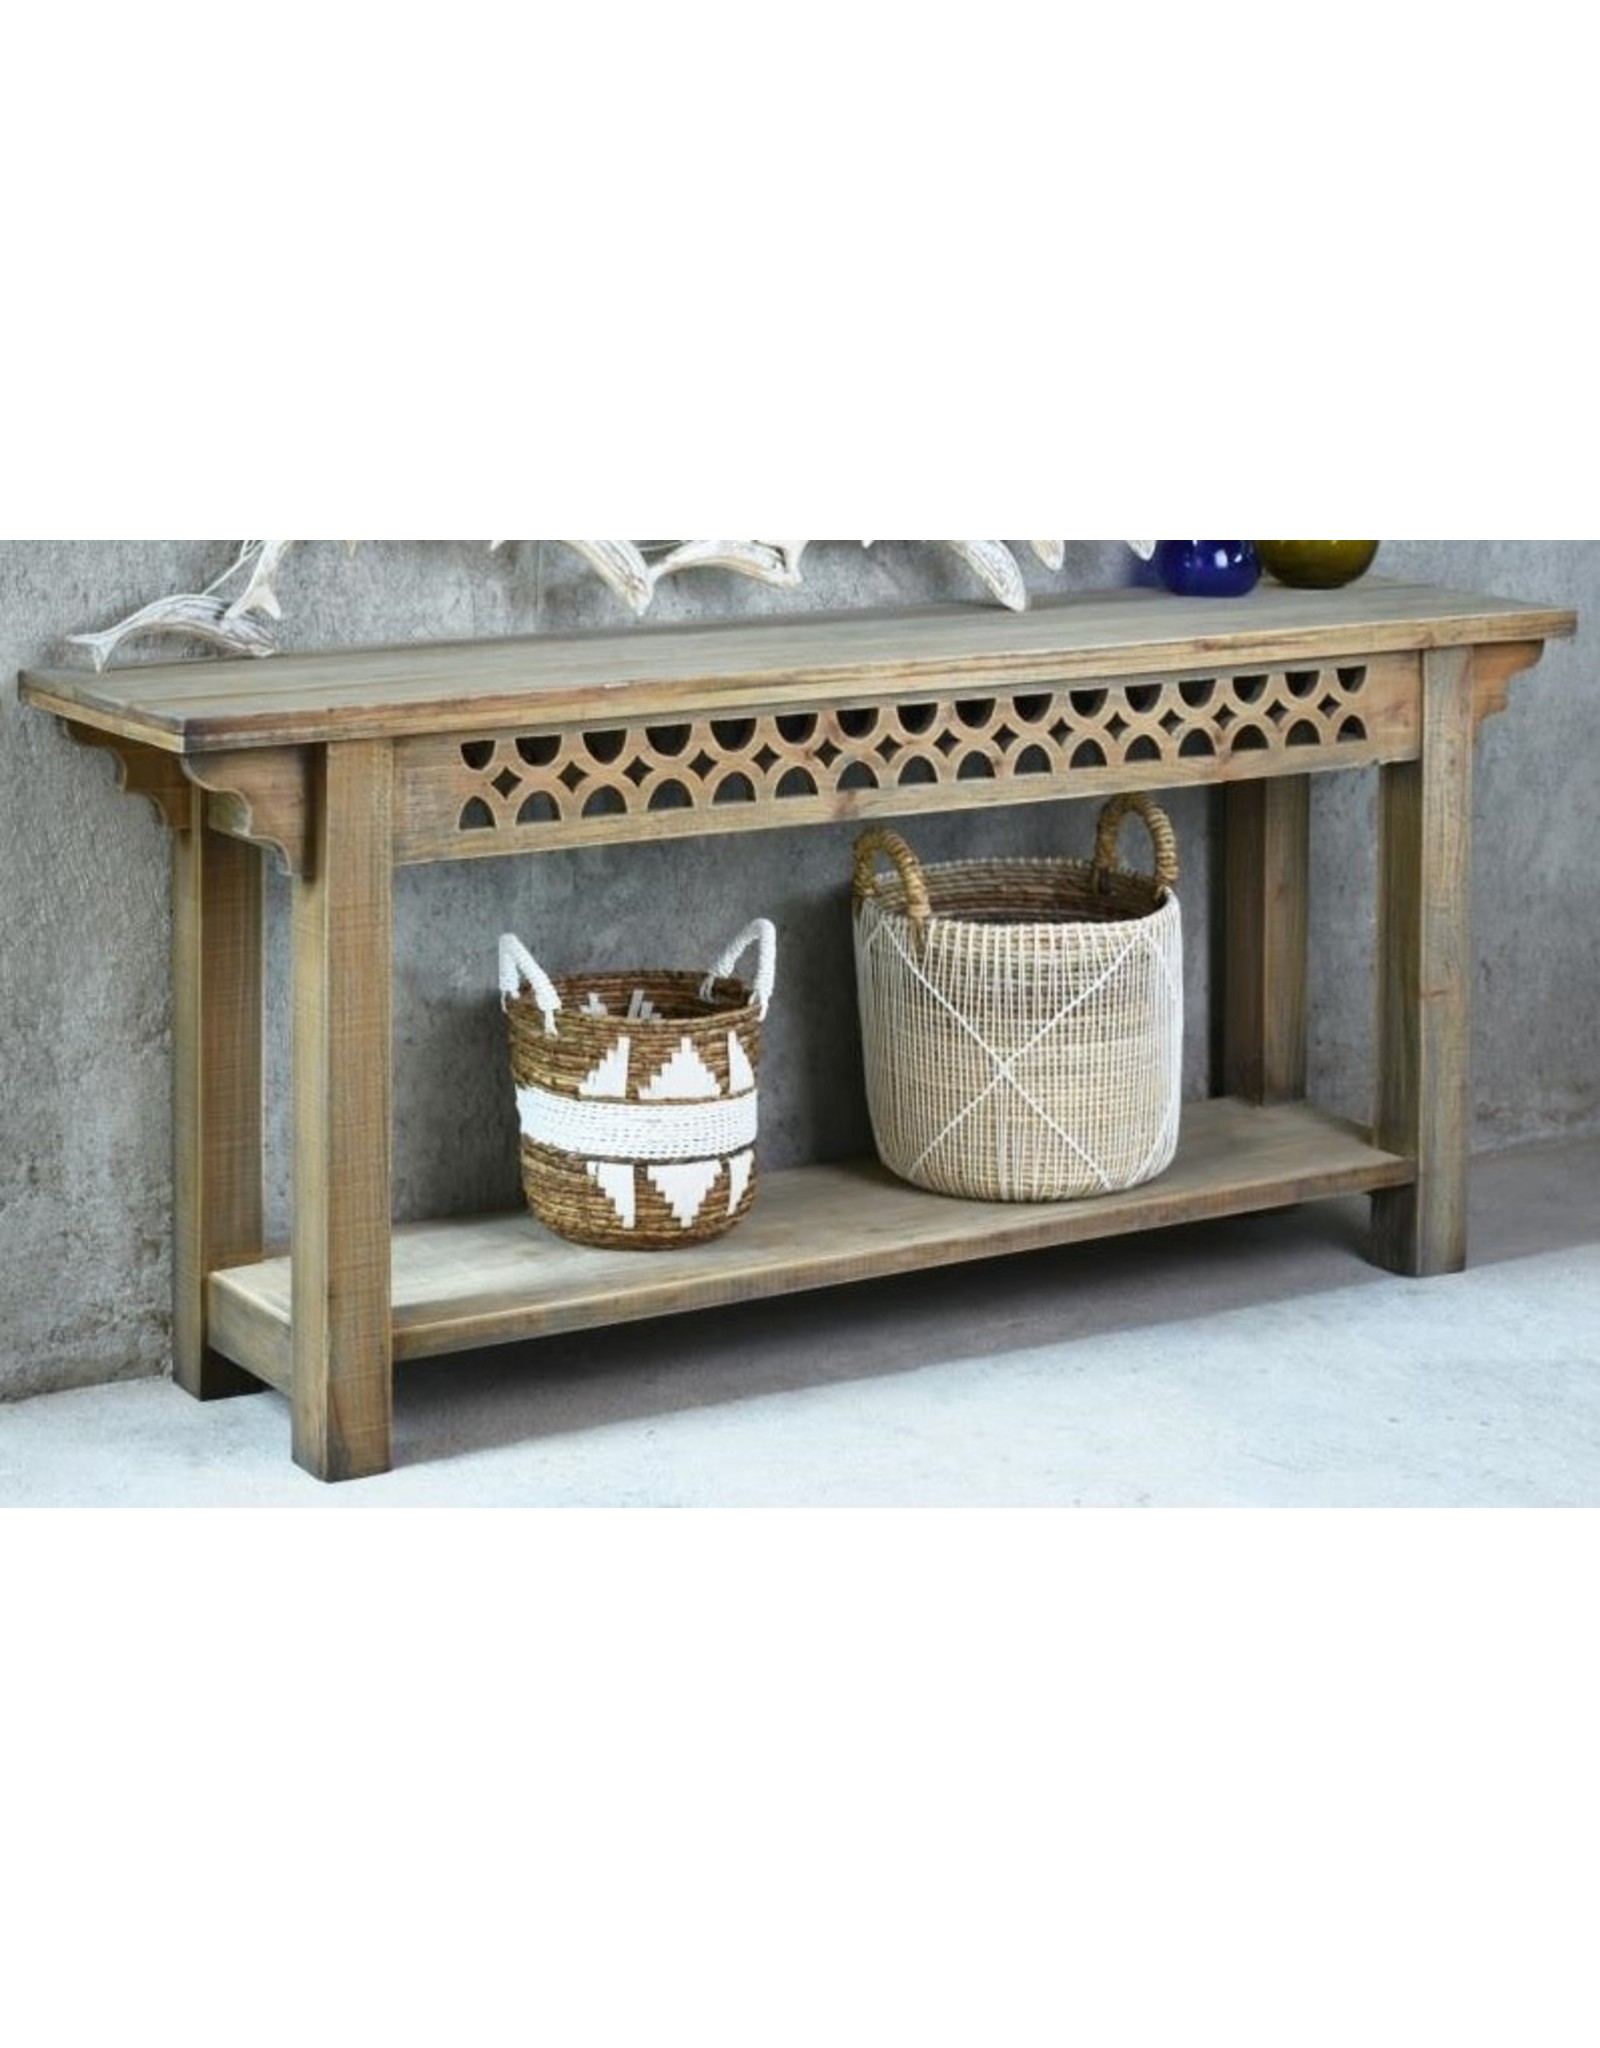 TAB237 Console Table 72.8x16.1x31.8"H